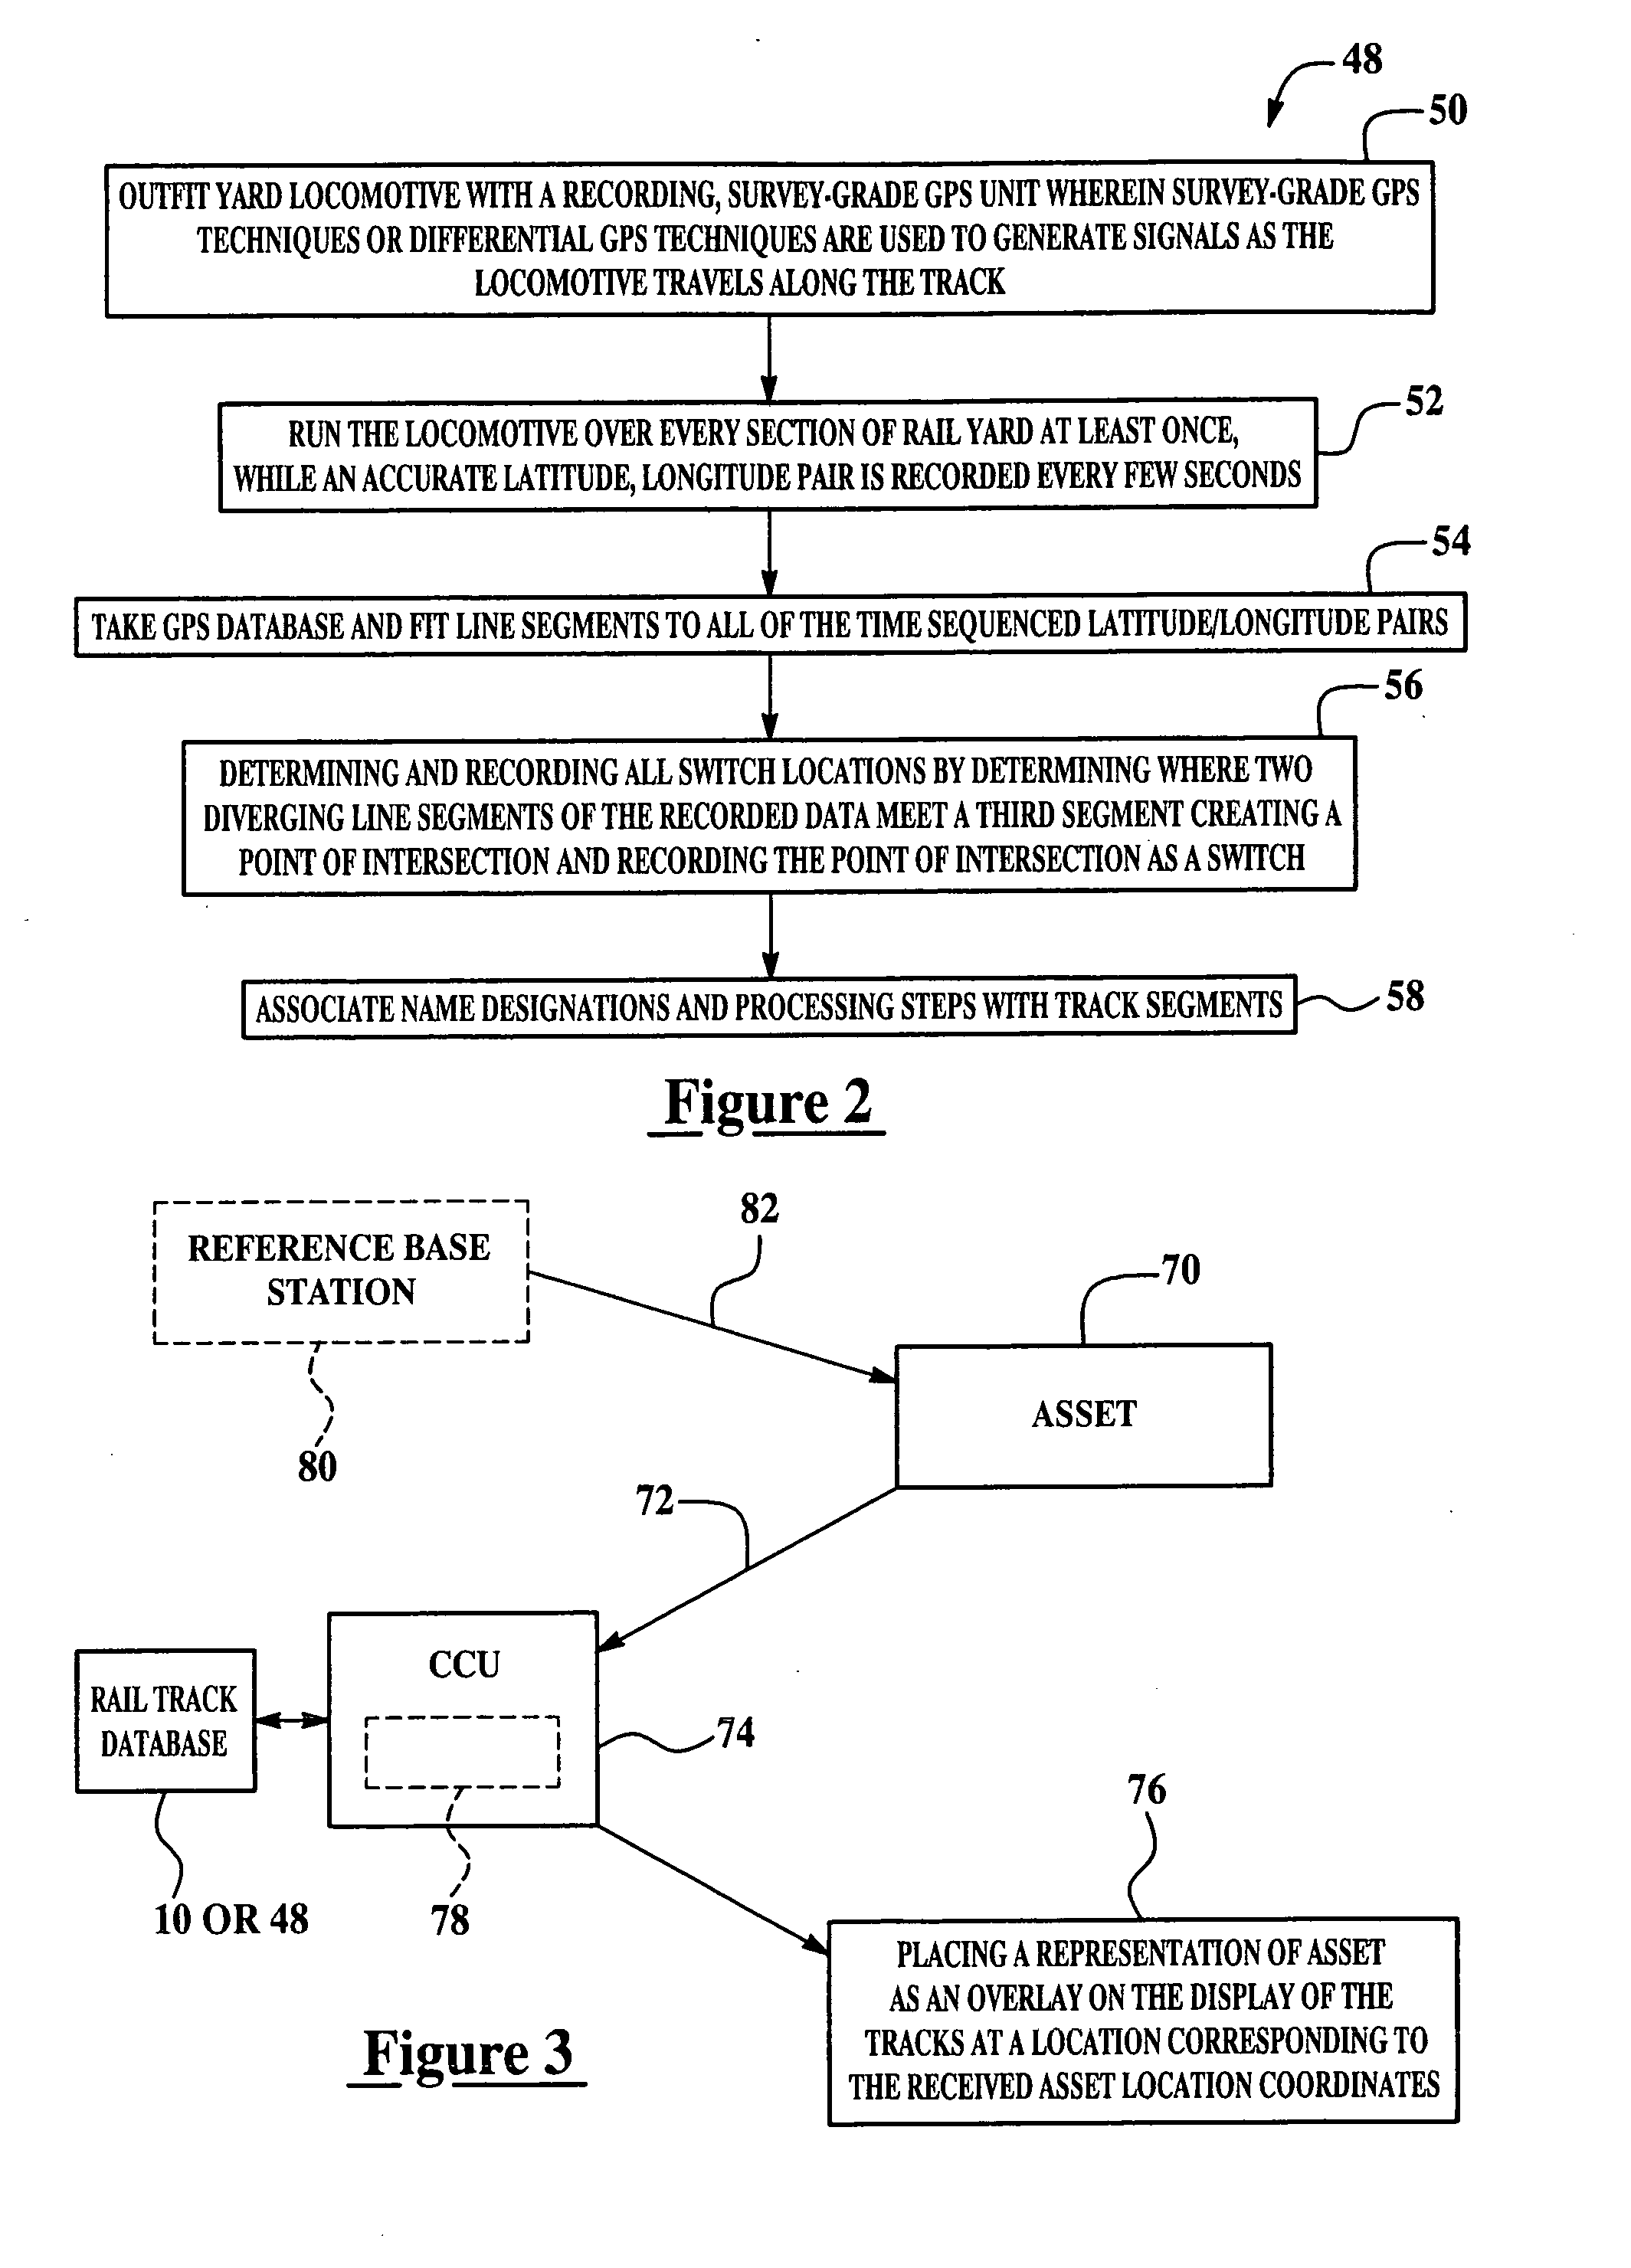 Apparatus and method for locating assets within a rail yard